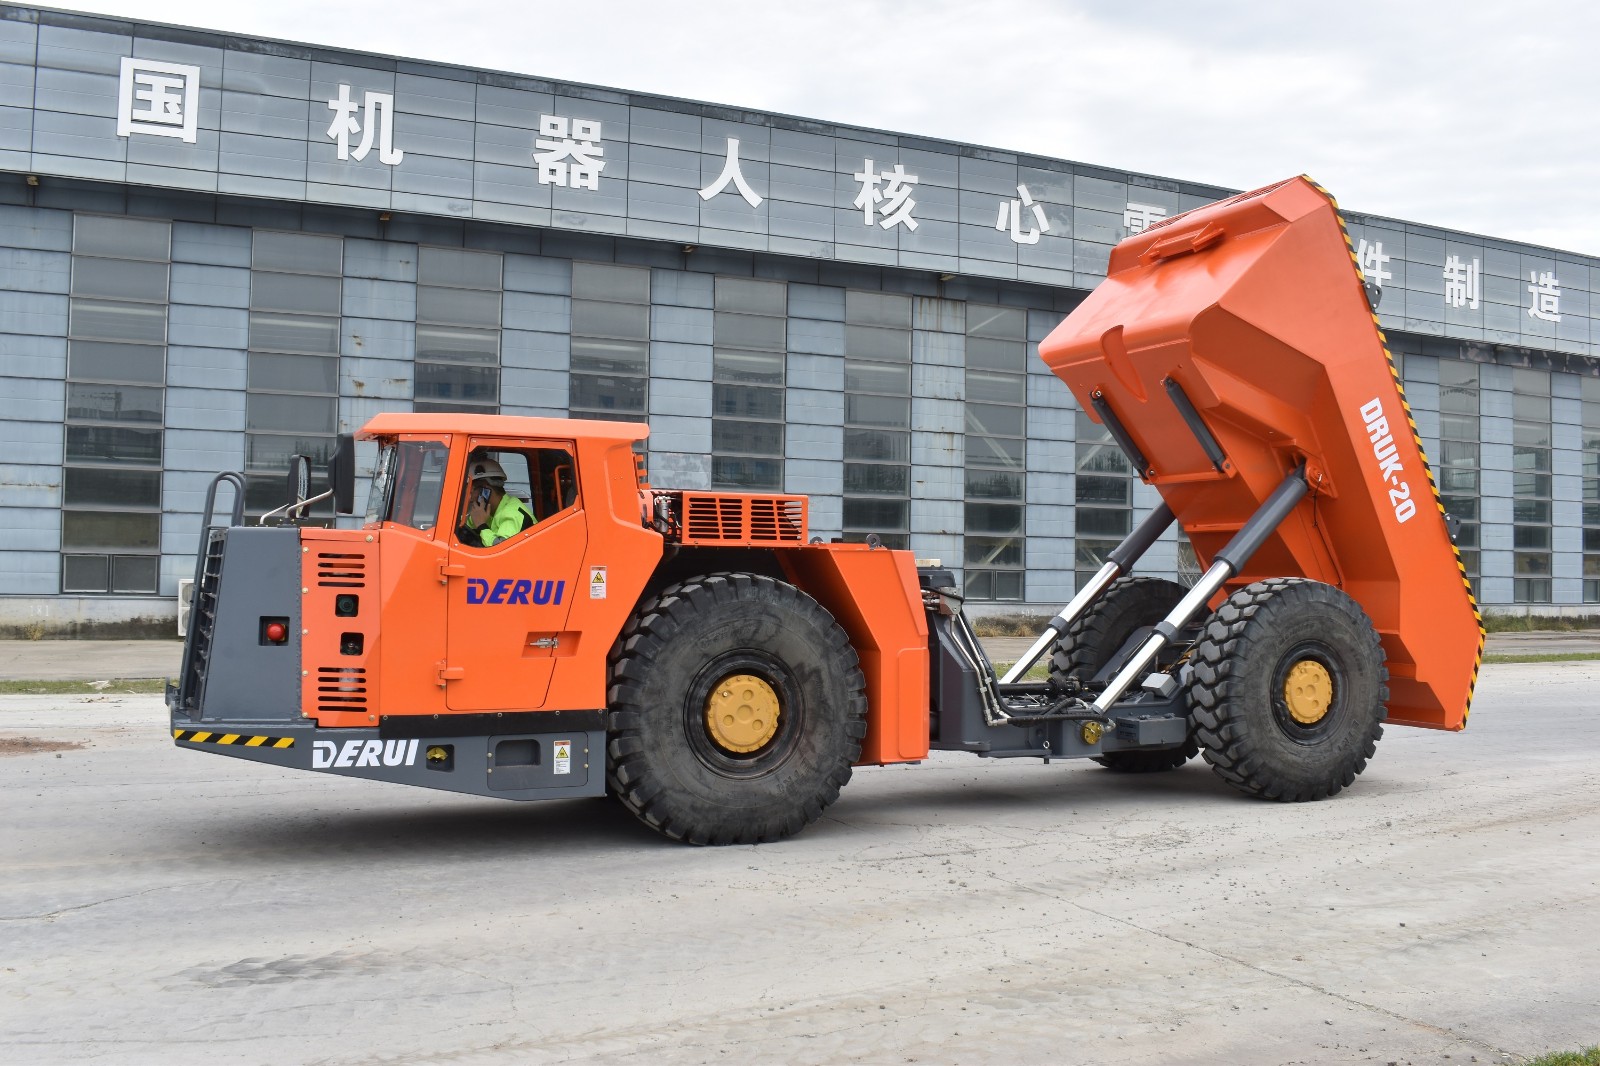 DERUI launch the new generation of  underground truck with 20 ton payload